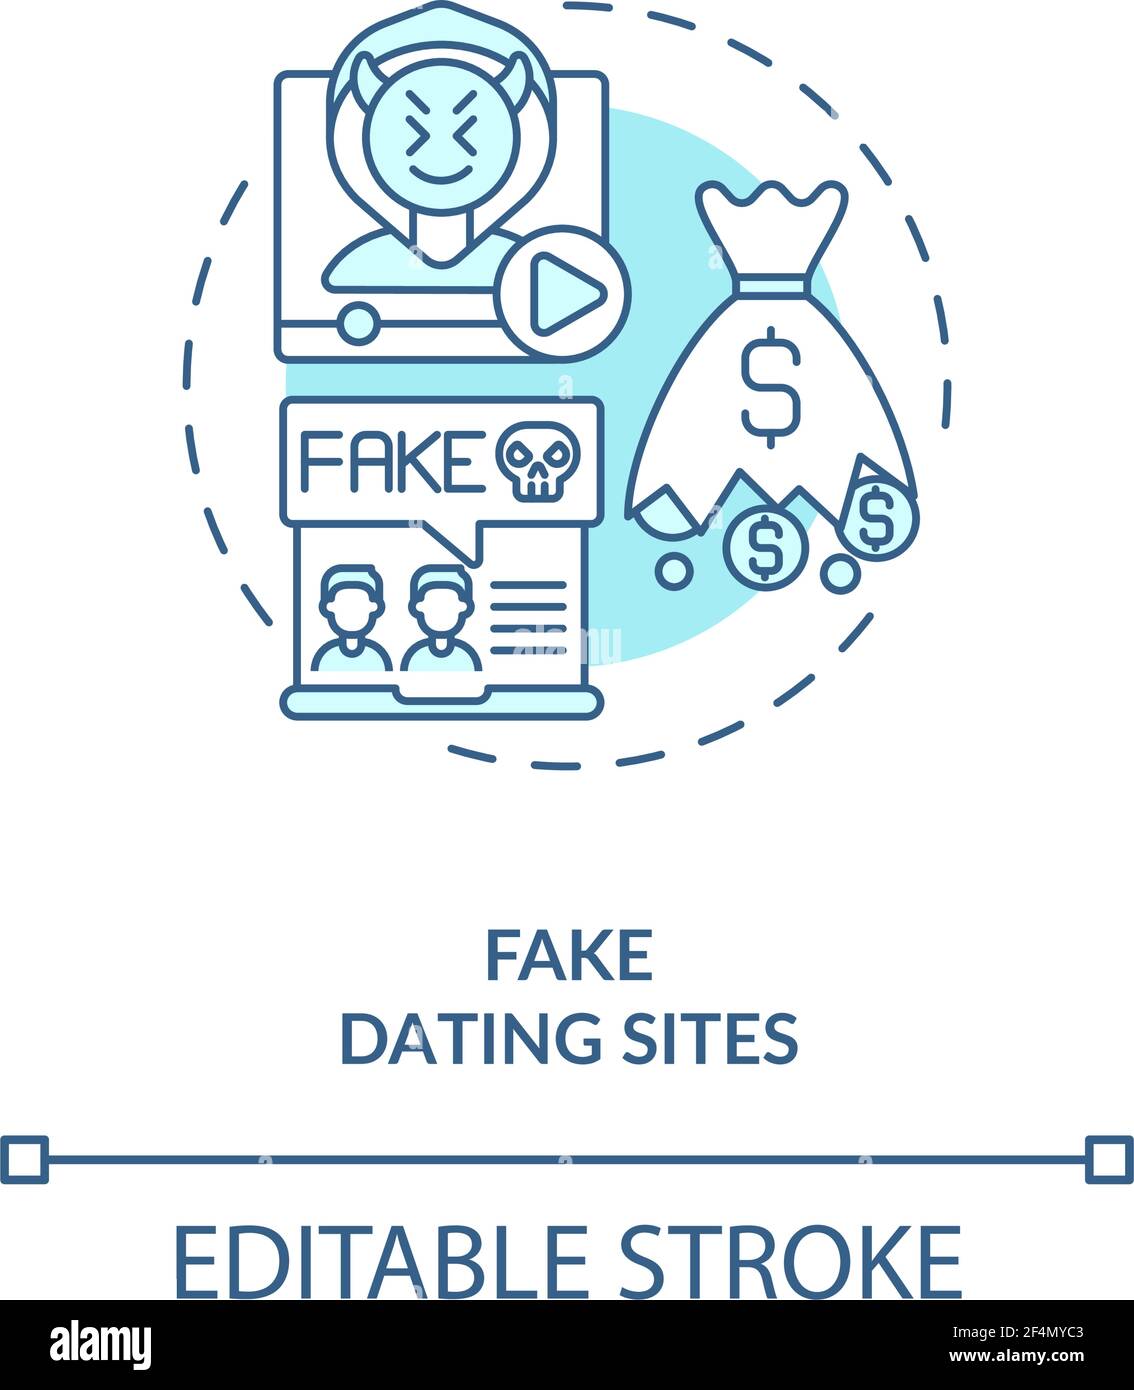 Fake dating website concept icon. Stock Vector